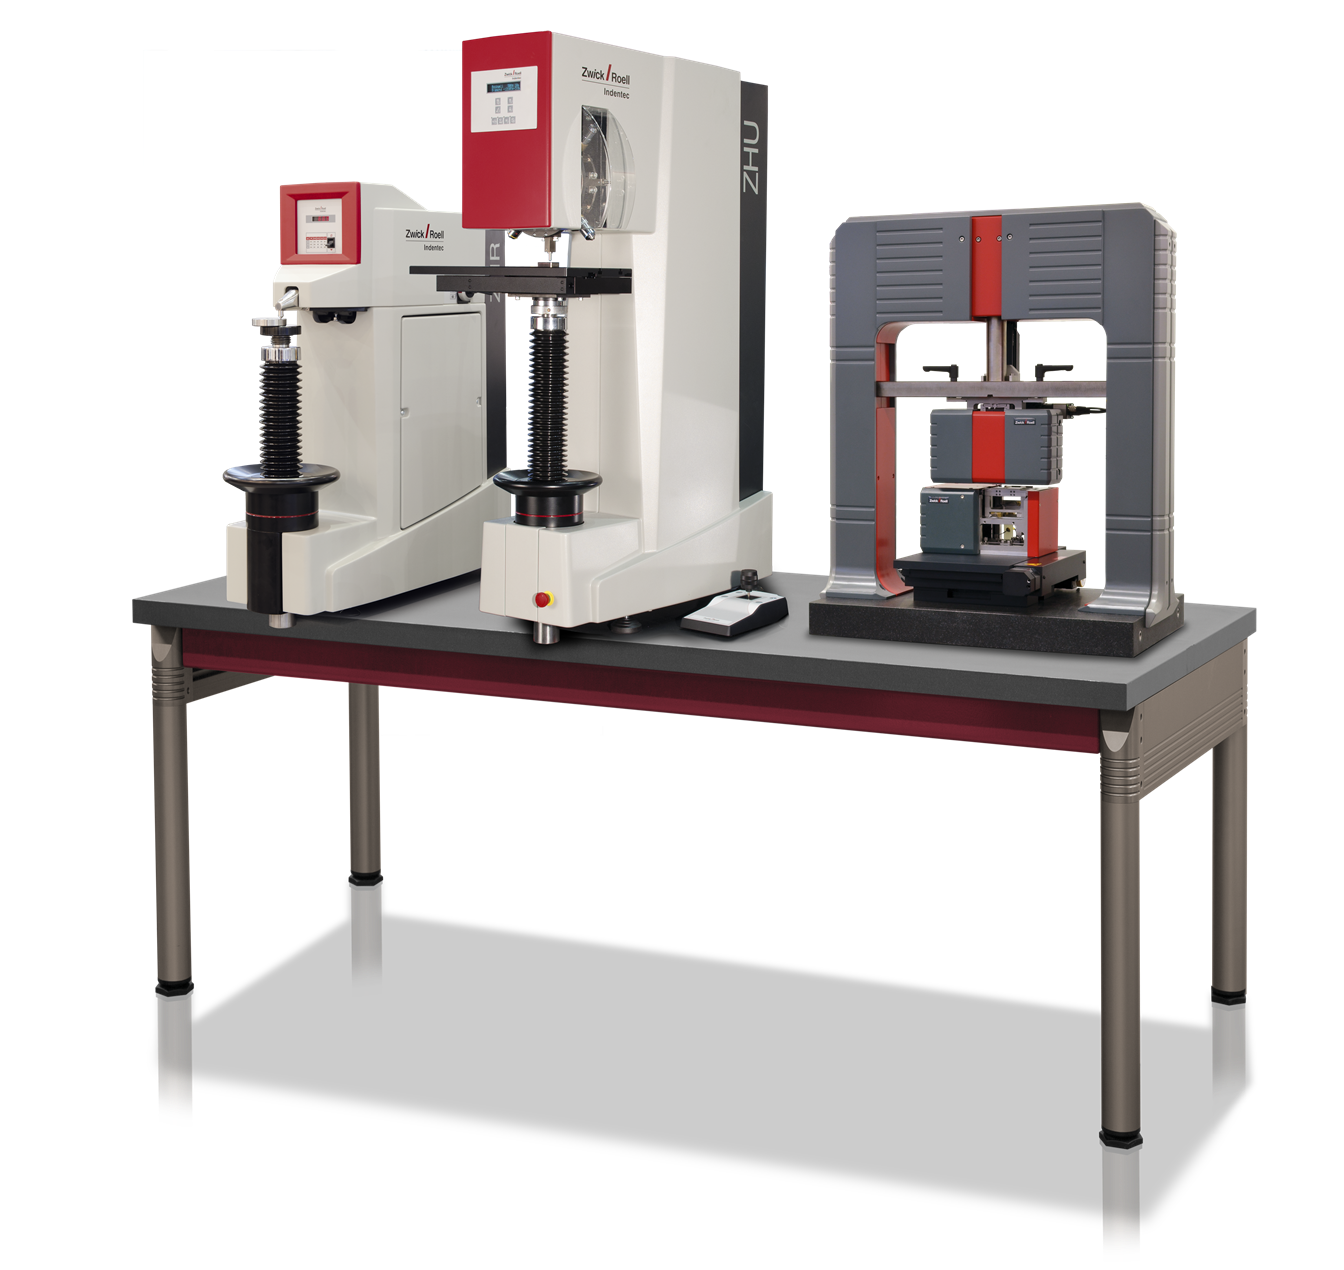 Hardness Testing Machines from ZwickRoell